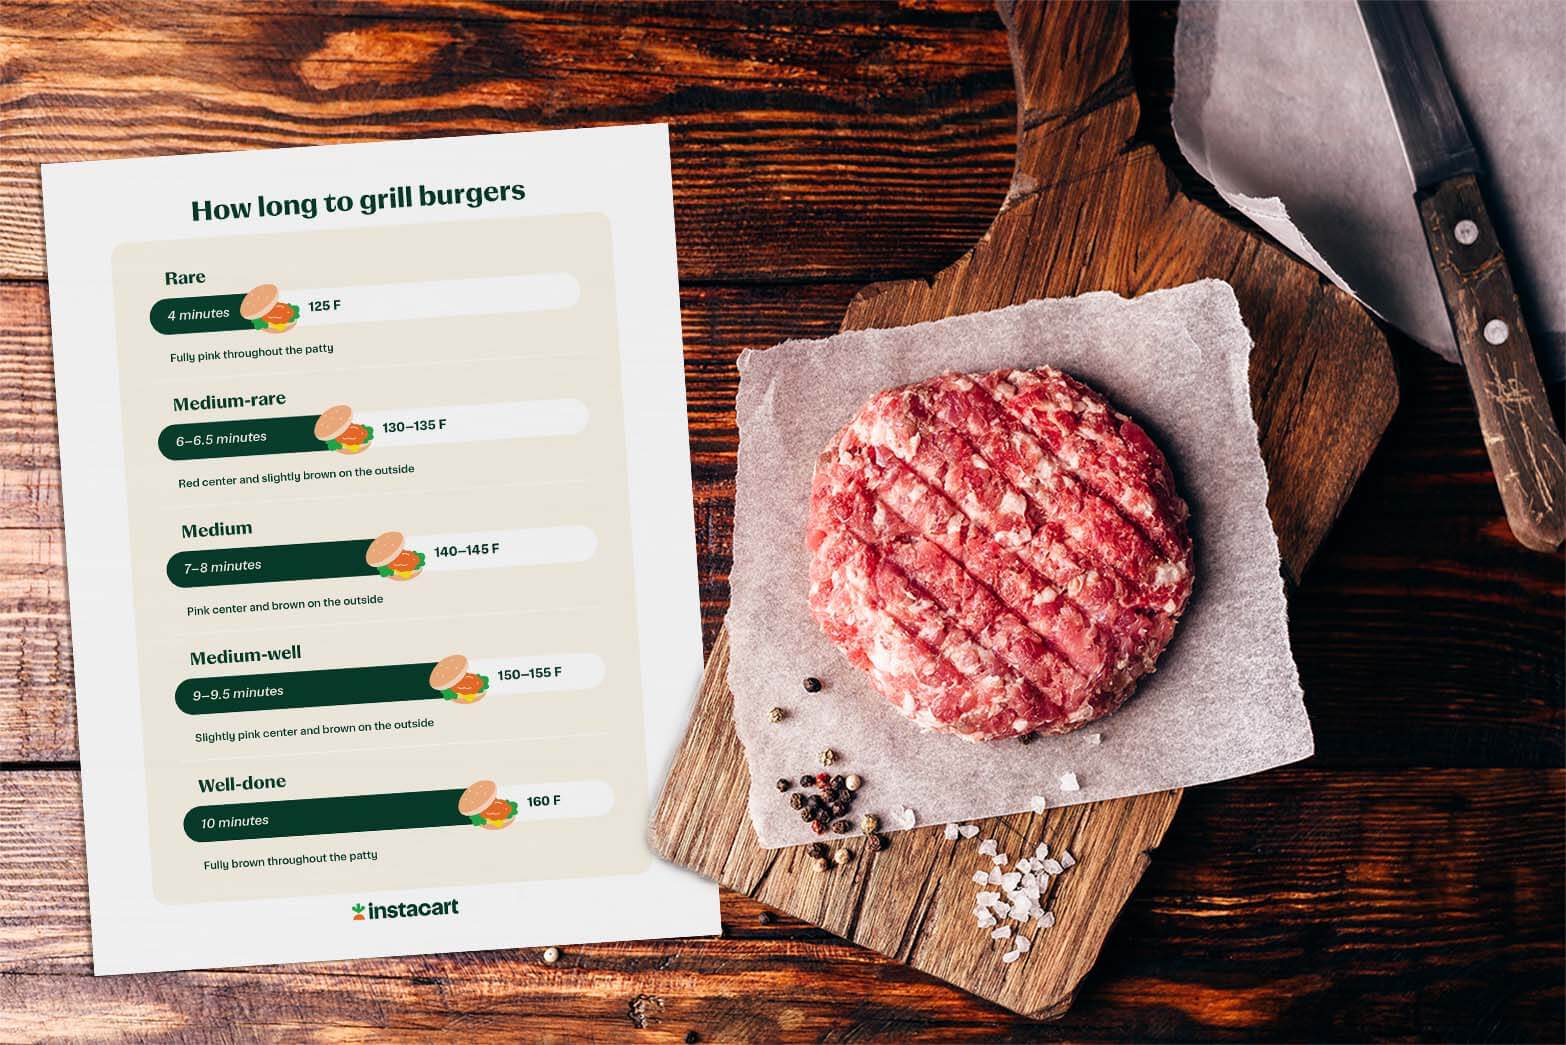 https://www.instacart.com/company/wp-content/uploads/2023/03/how-long-to-grill-burgers-mockup.jpg